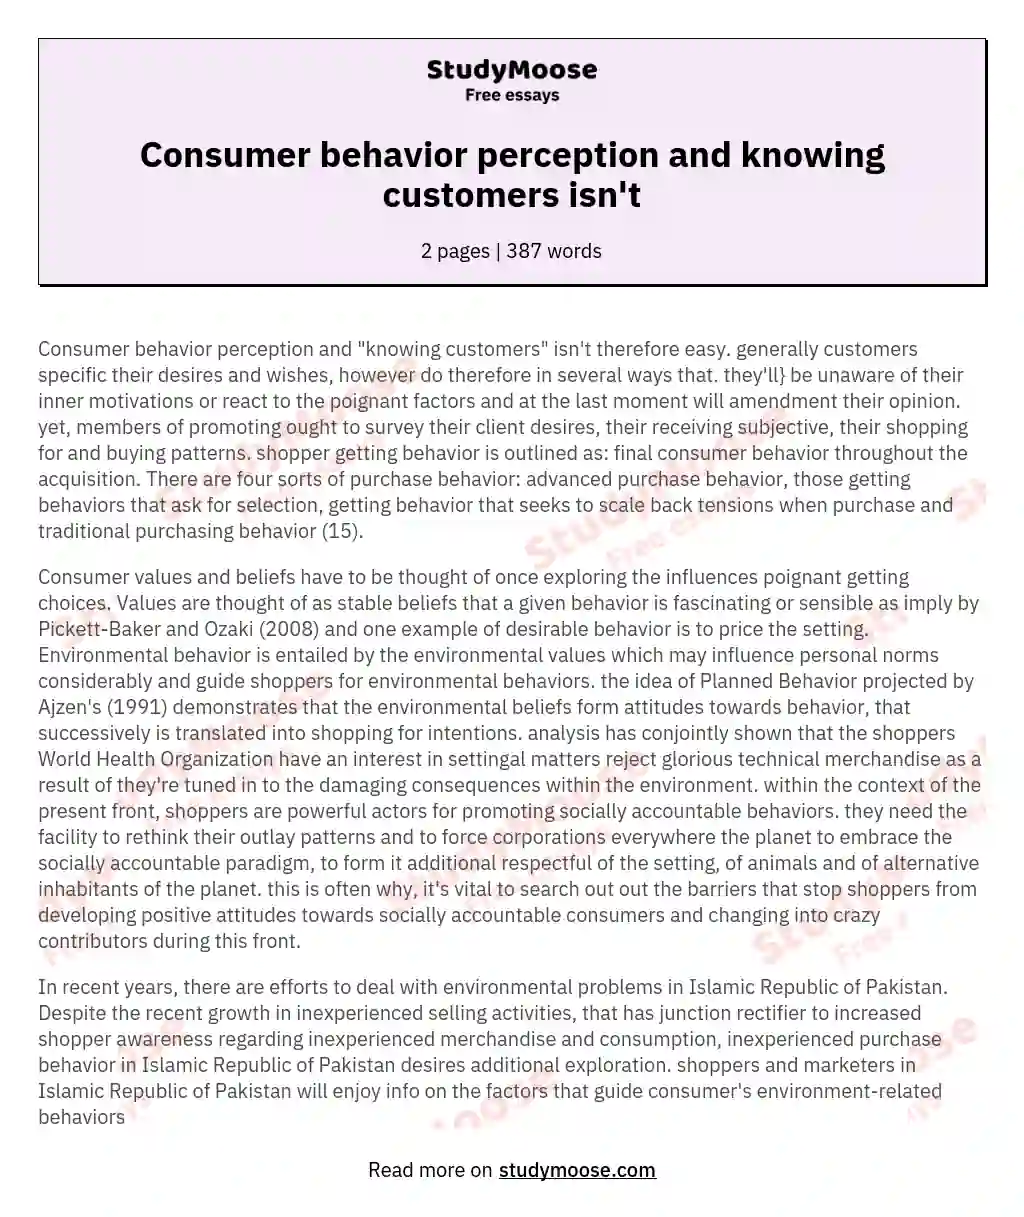 Consumer behavior perception and knowing customers isn't essay